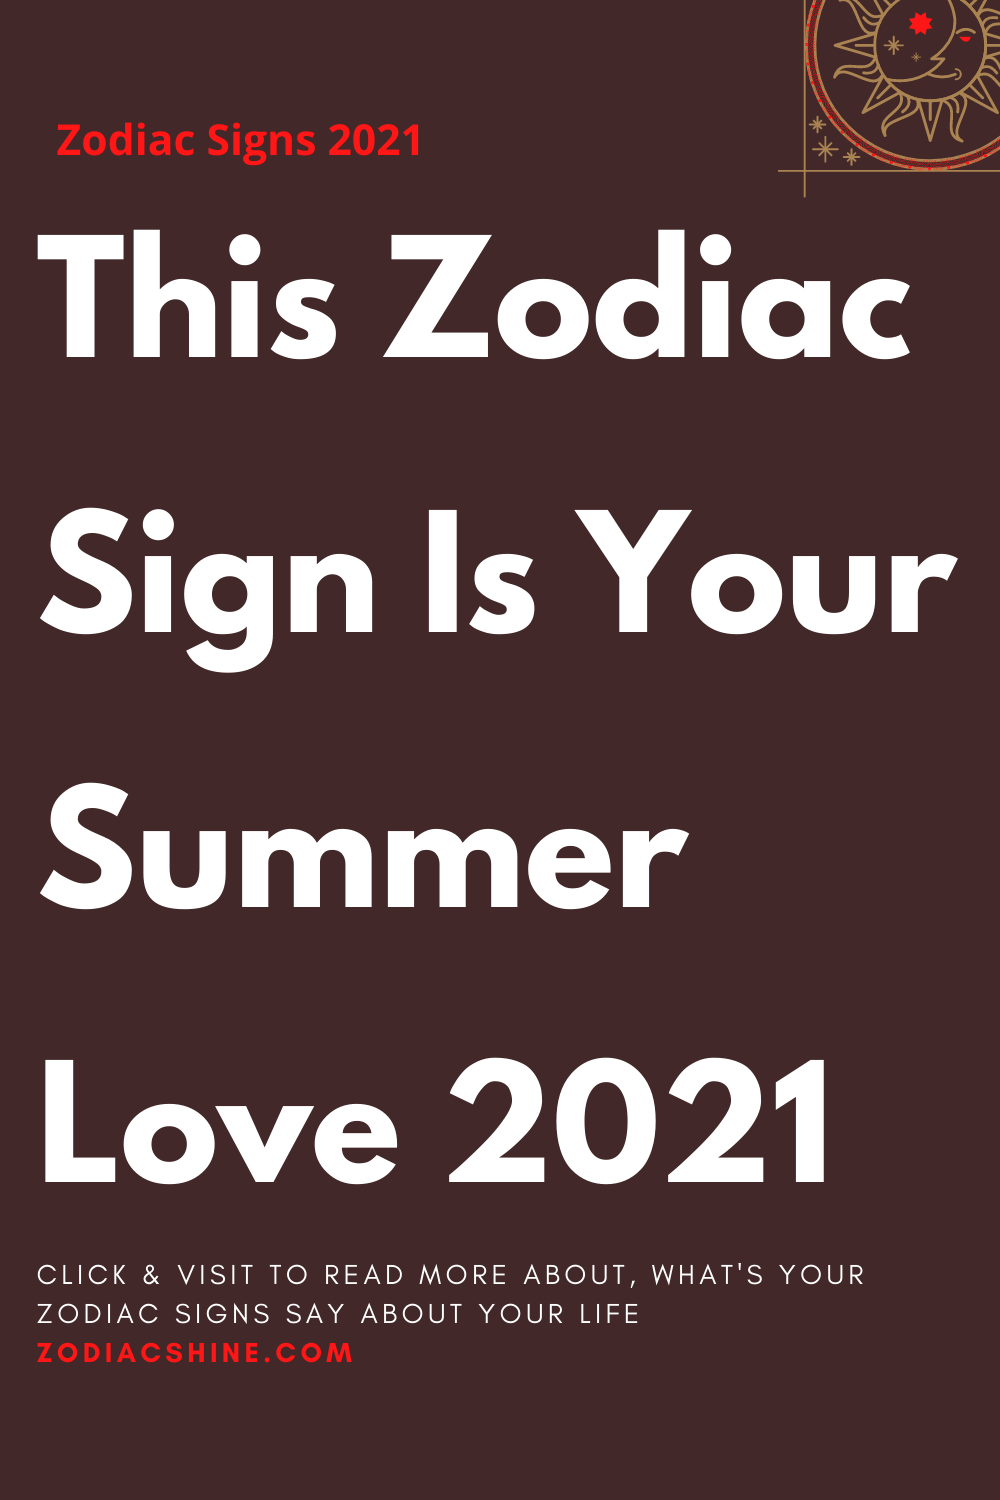 This Zodiac Sign Is Your Summer Love 2021